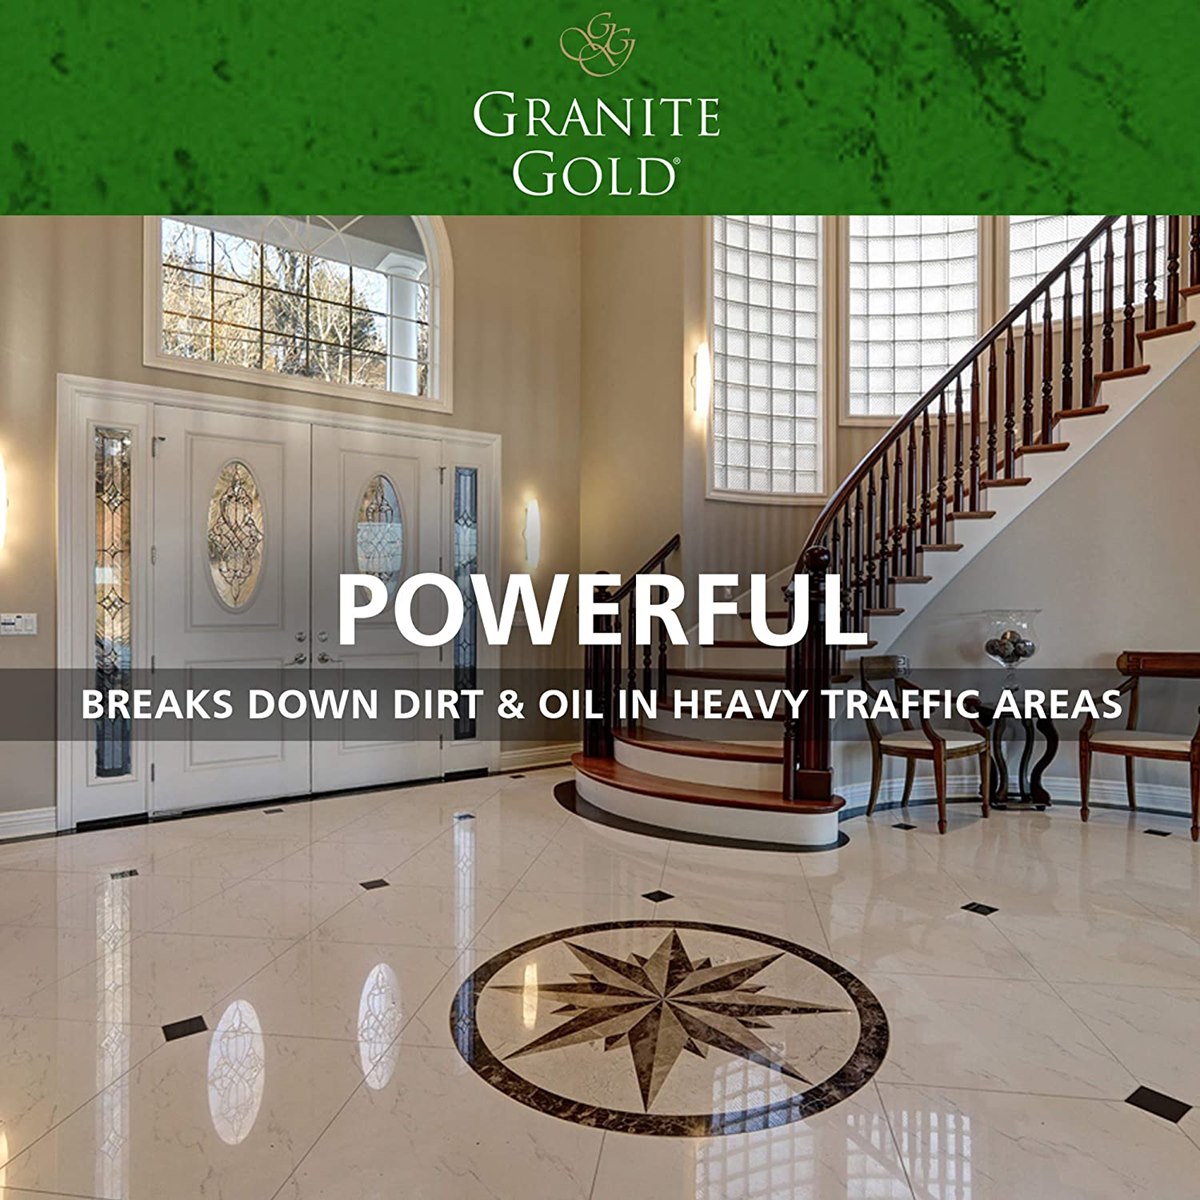 How to Clean Marble Floors